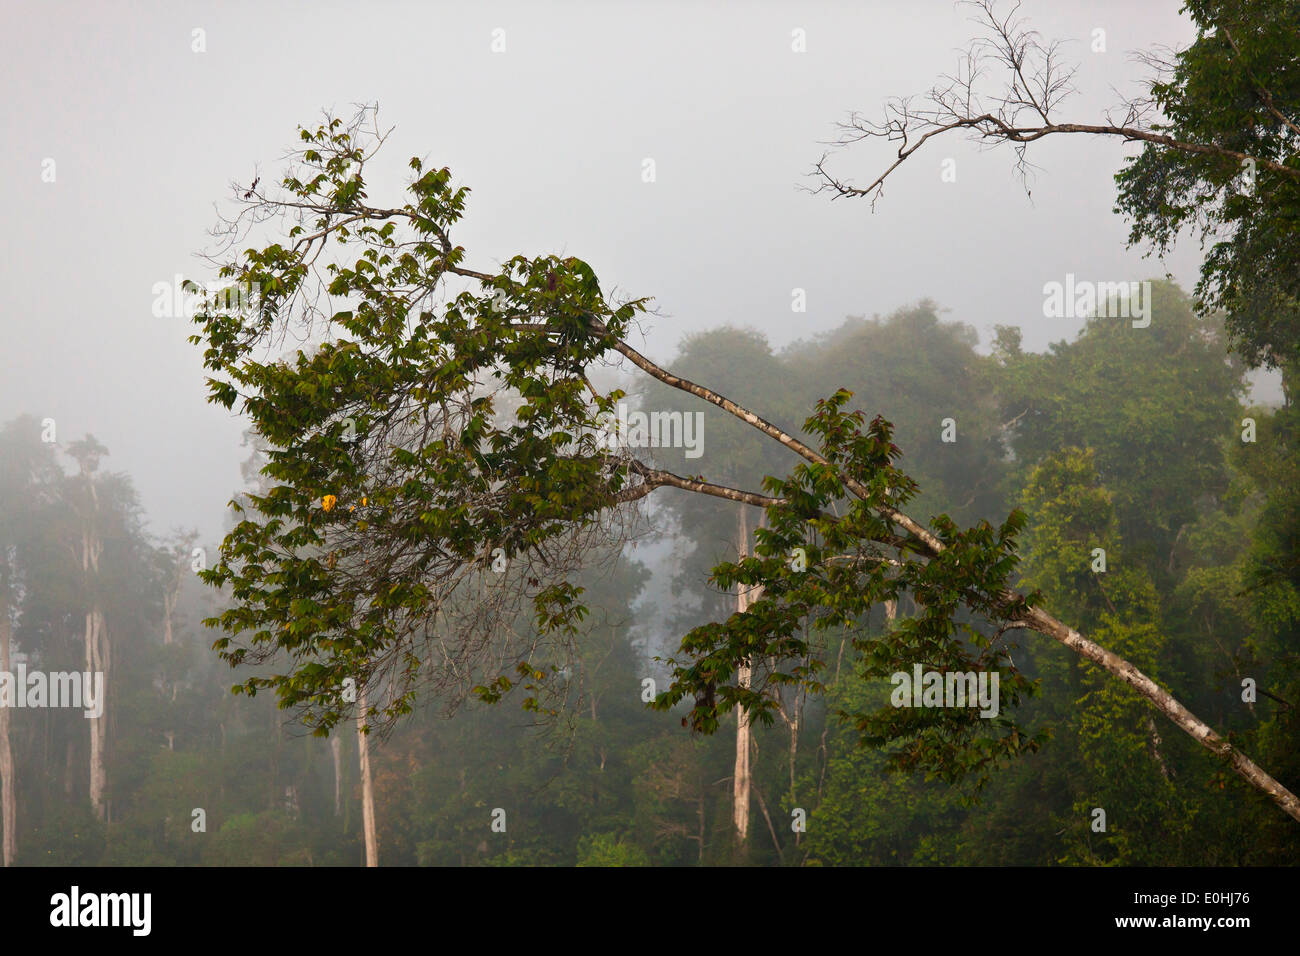 A foggy morning in the rainforest of the KINABATANGAN RIVER WILDLIFE SANCTUARY - SABAH, BORNEO Stock Photo